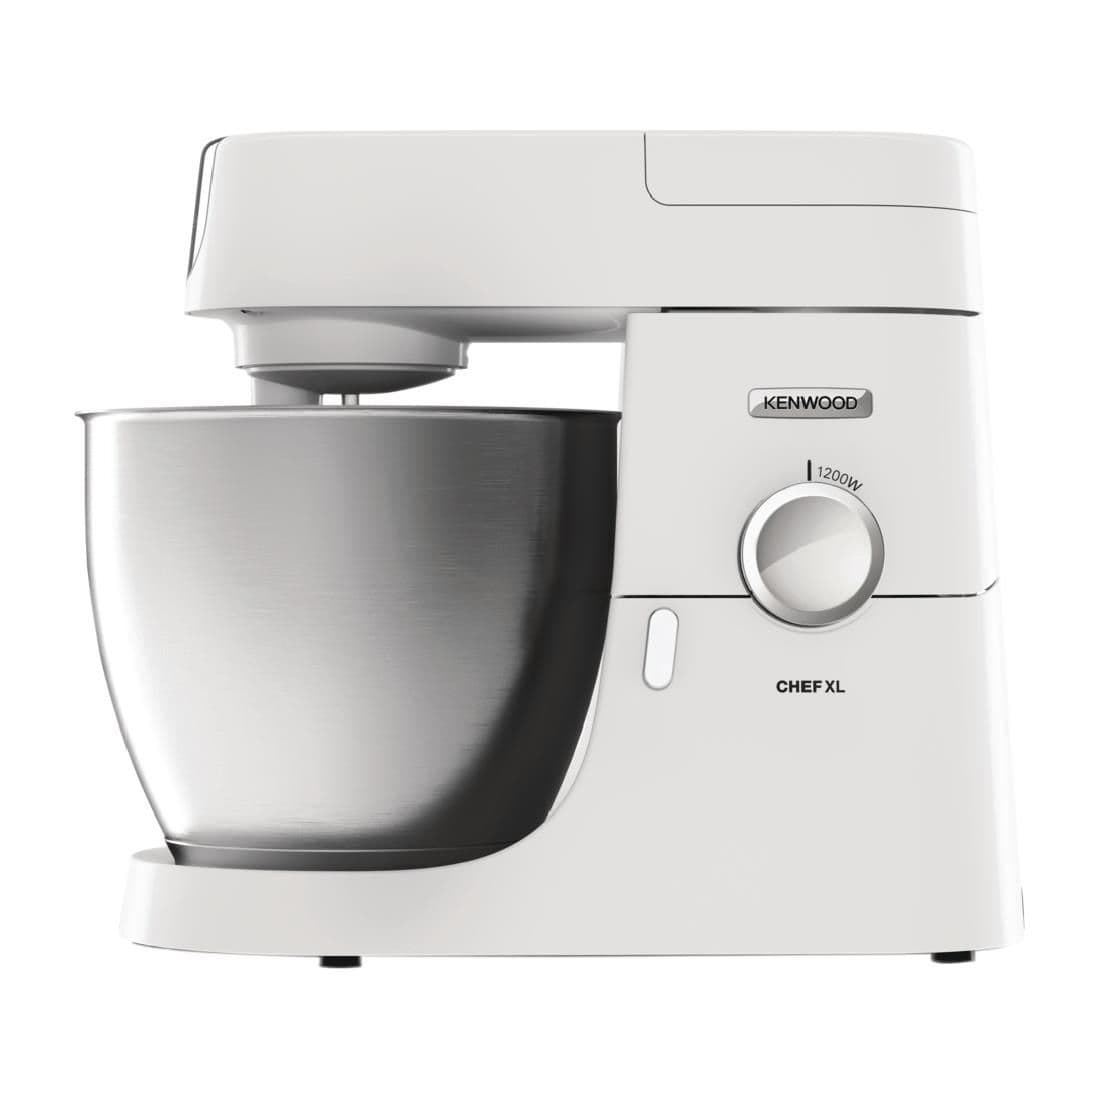 CT992 Kenwood Chef XL Stand Mixer KVL4100W JD Catering Equipment Solutions Ltd